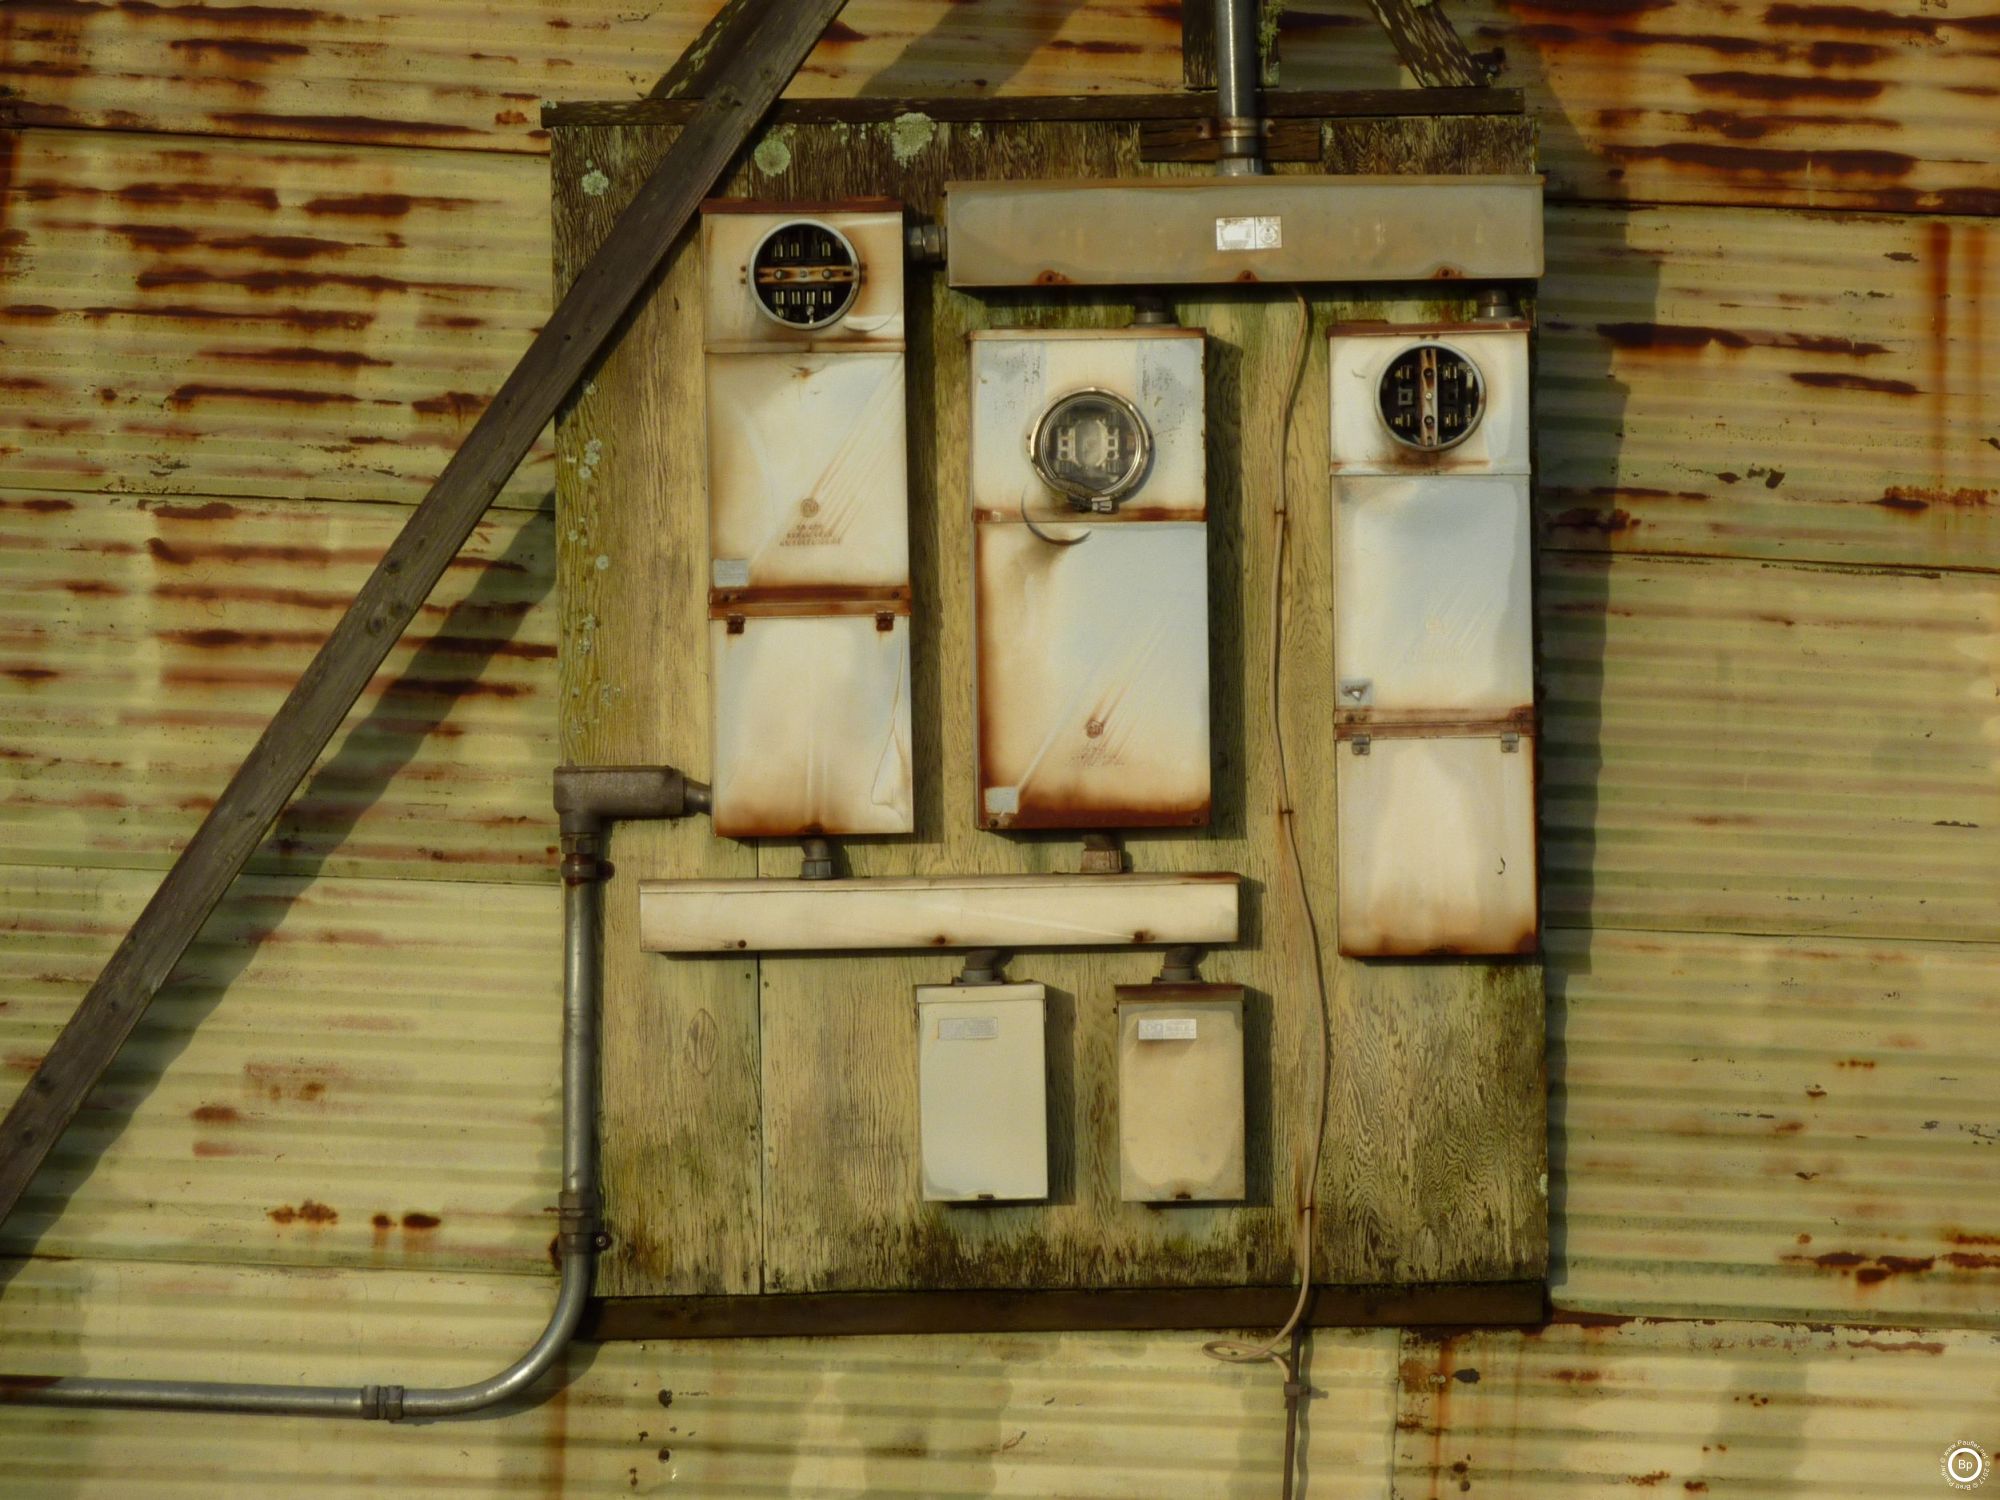 Rural rustic images of decay, these two be, electric meters